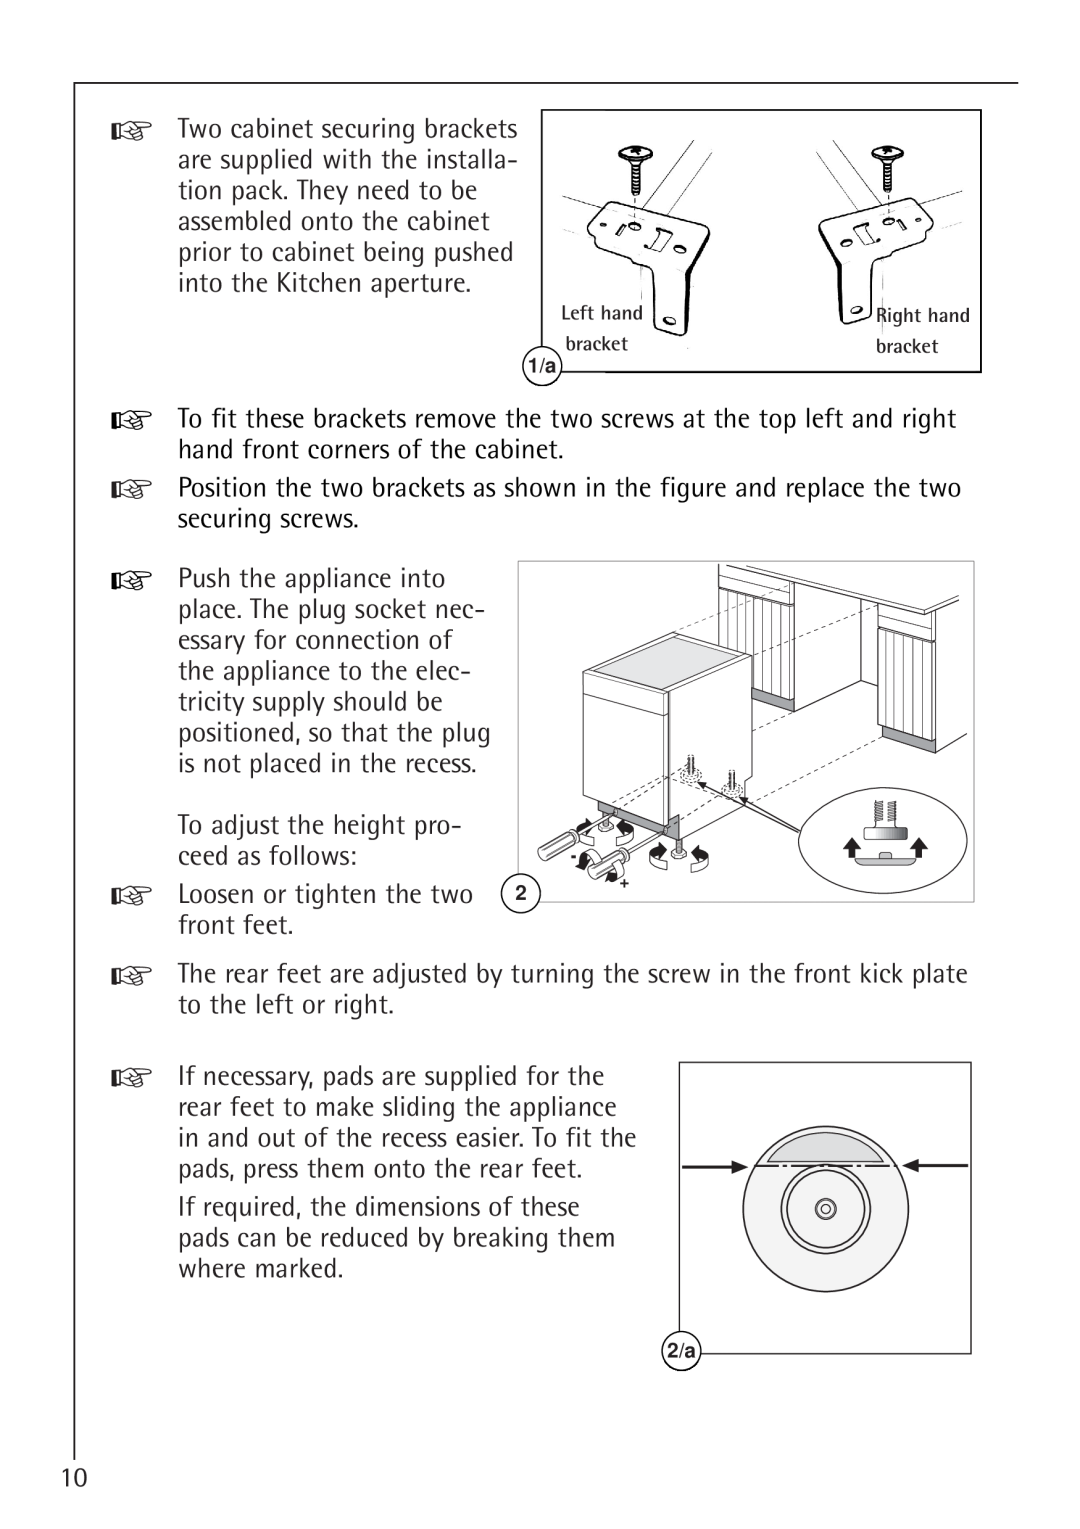 Electrolux 66050i installation instructions To adjust the height pro- ceed as follows 